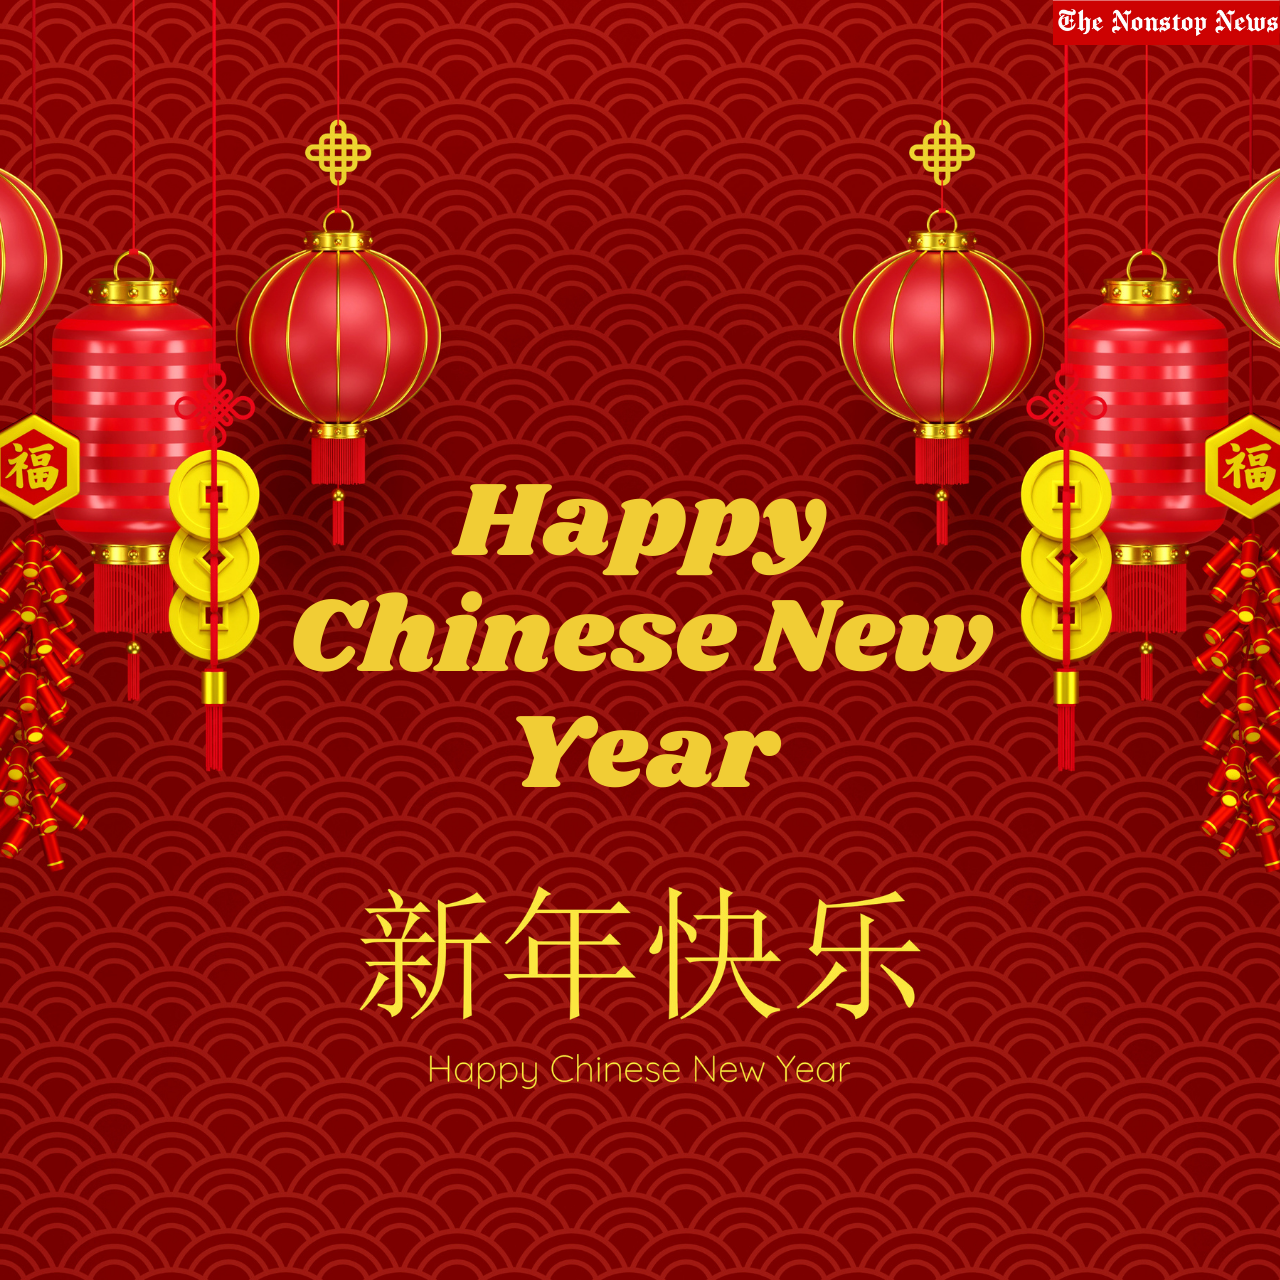 Chinese New Year 2022 Wishes, Quotes, HD Images, Greetings, Messages to greet your friends and family